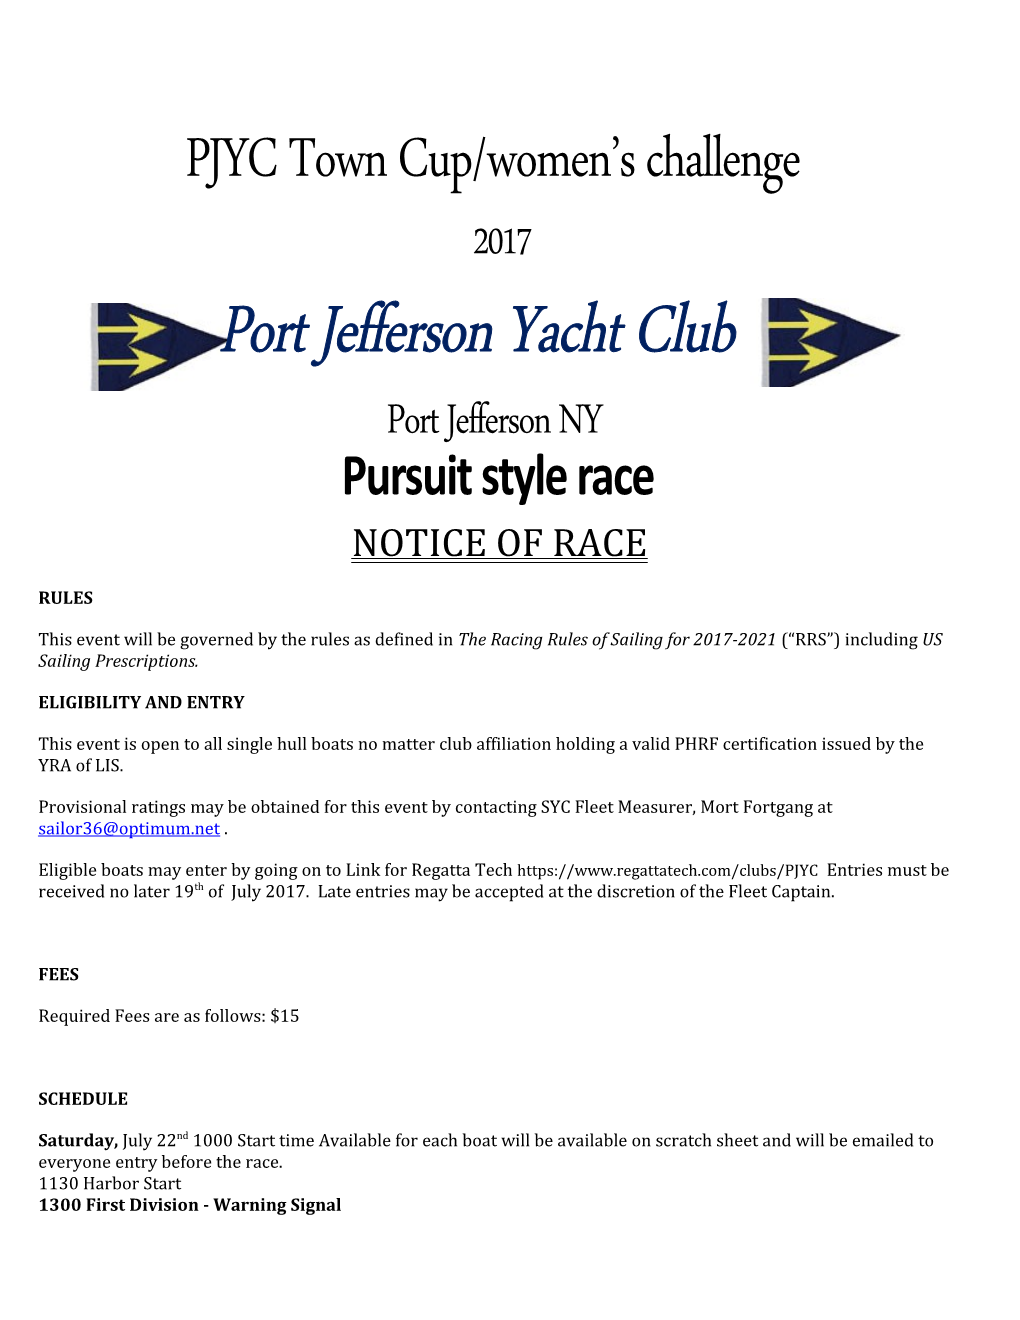 PJYC Town Cup/Women S Challenge